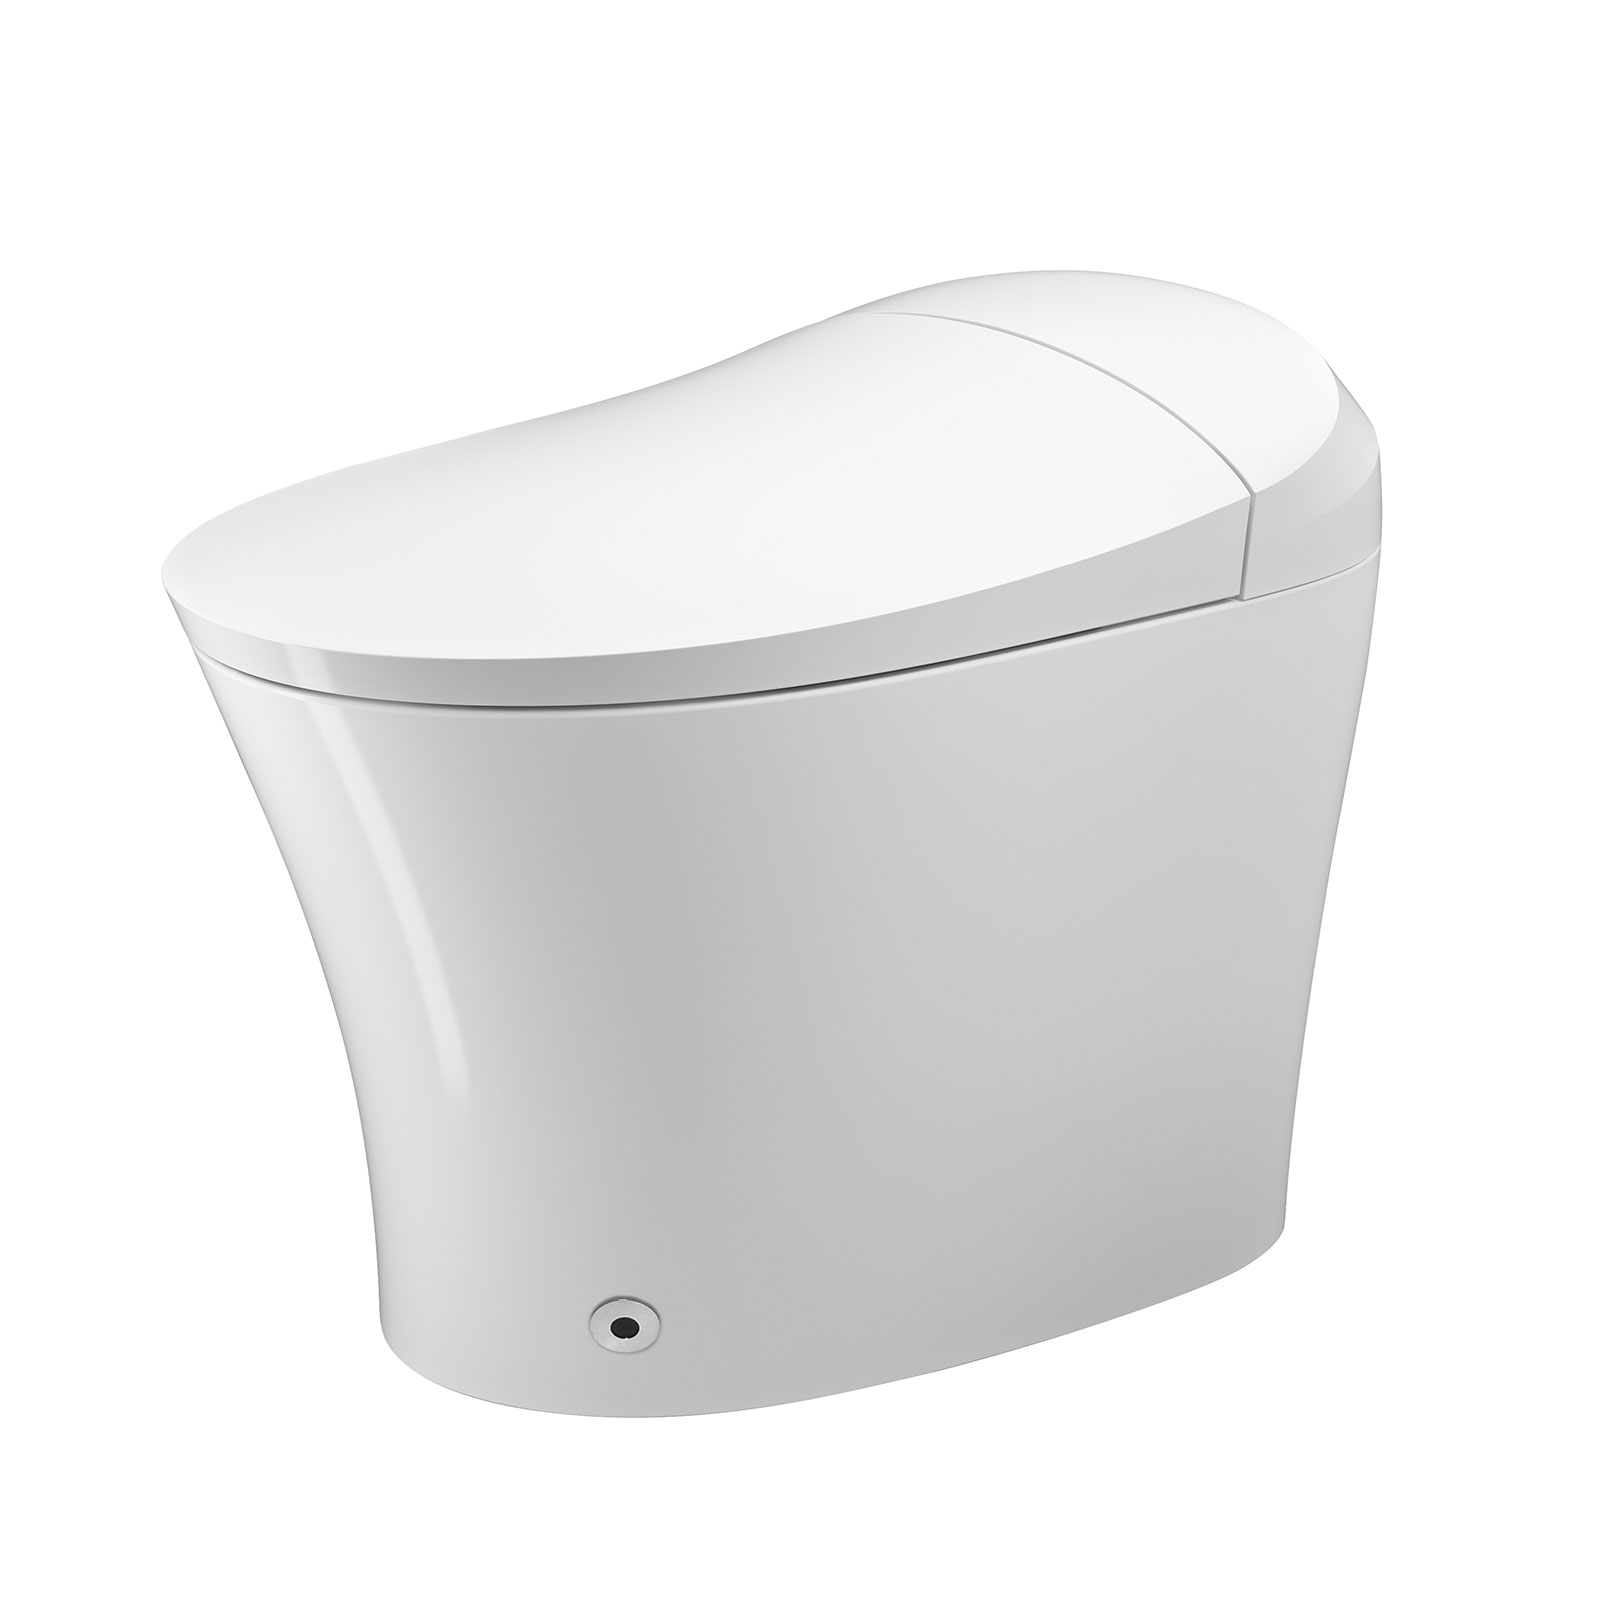 Smart Bathroom Fixtures Offer a More Sanitary, Streamlined Experience